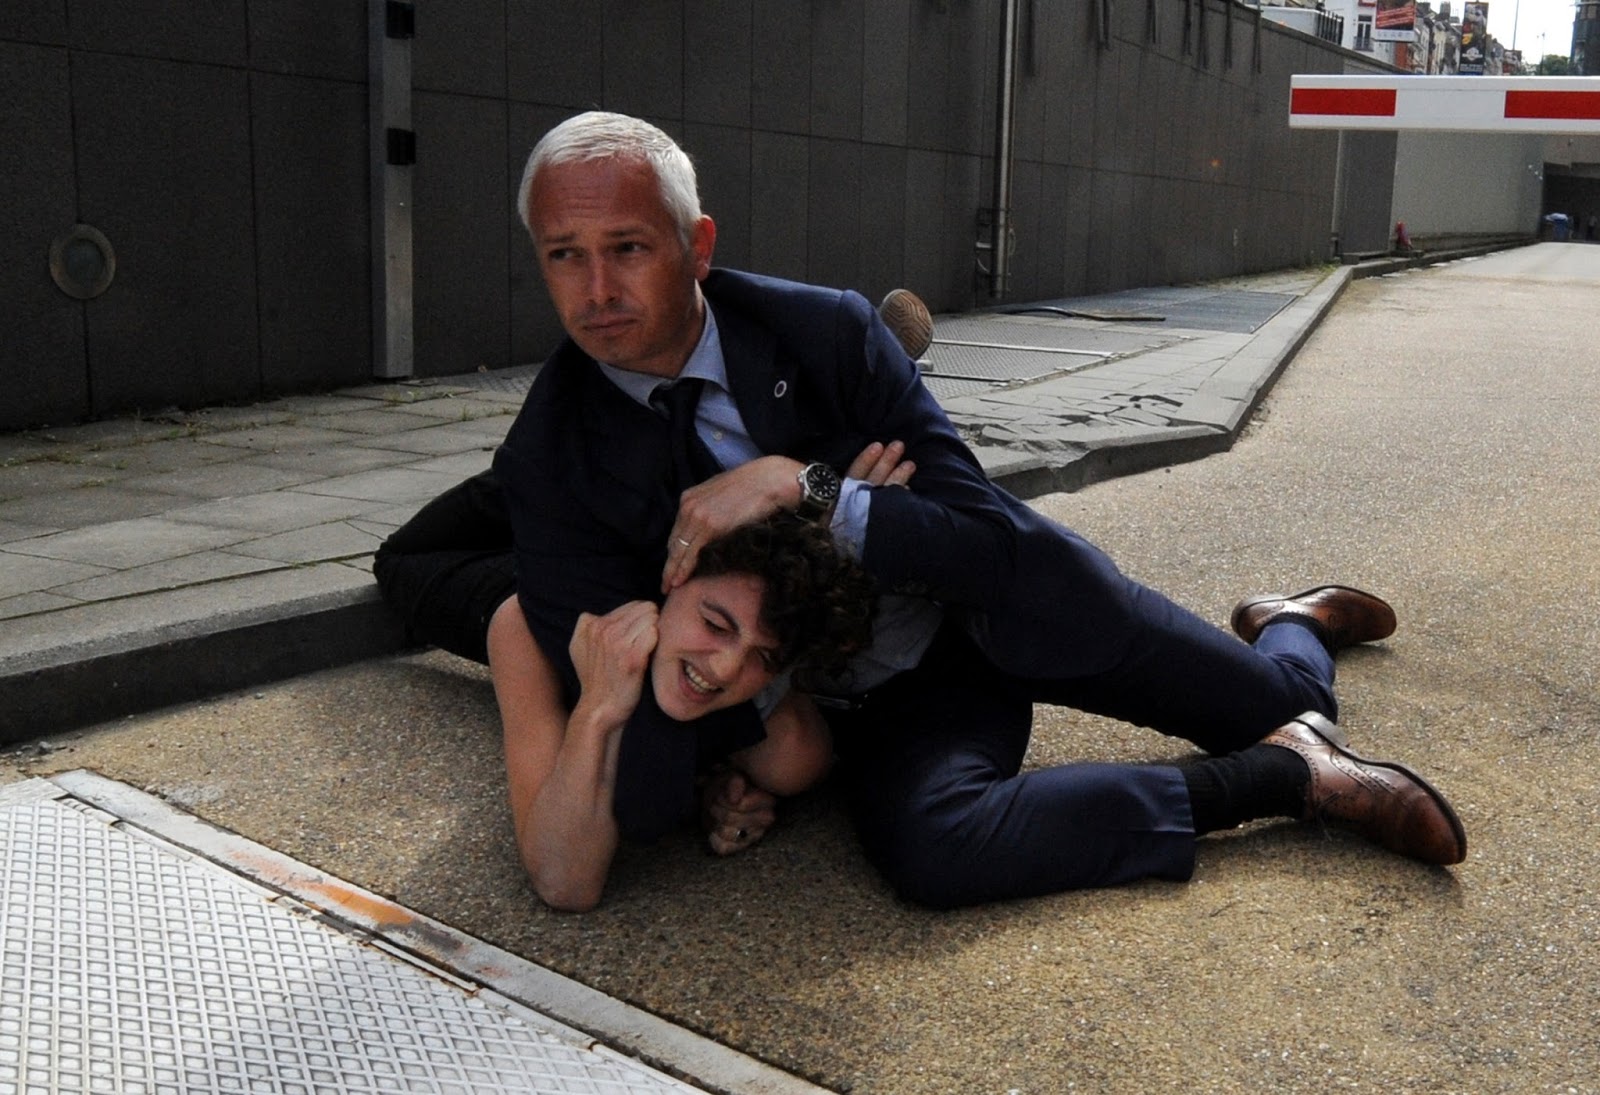 Security guard takes out feminist protester that attacked a government official. Sweet moves dude! Nice suit.